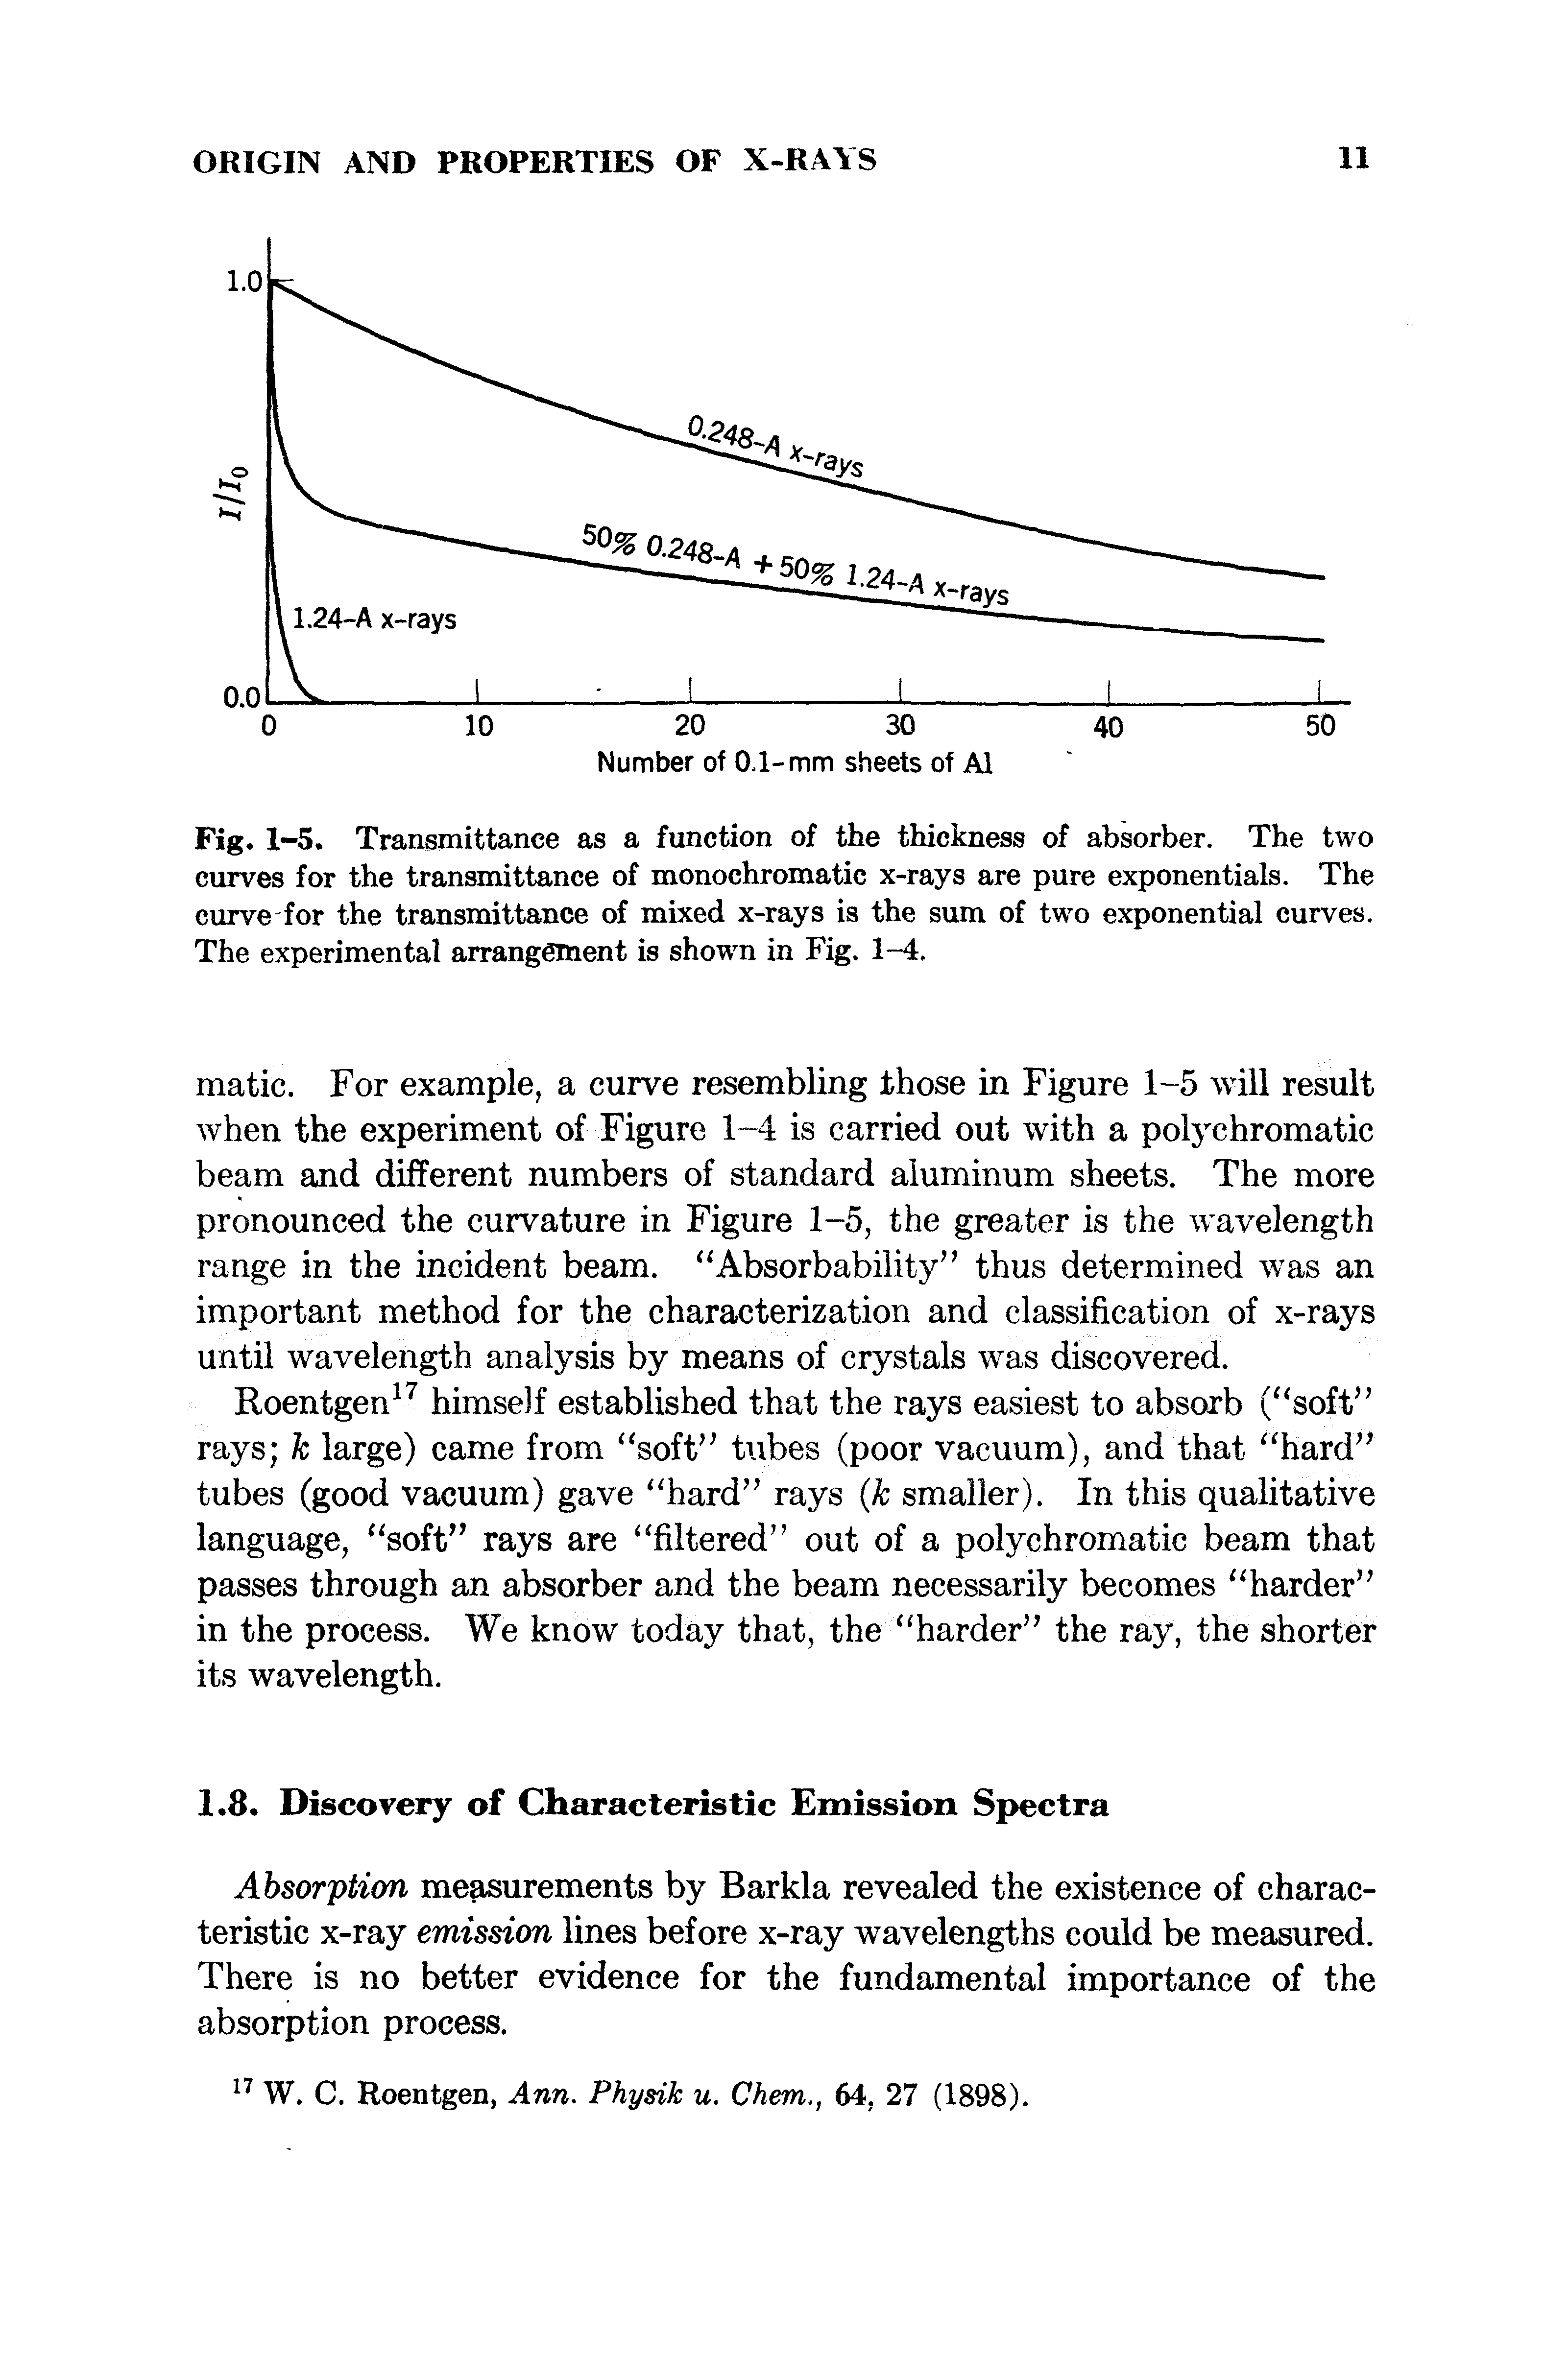 Fig. 1-5. Transmittance as a function of the thickness of absorber. The two curves for the transmittance of monochromatic x-rays are pure exponentials. The curve for the transmittance of mixed x-rays is the sum of two exponential curves. The experimental arrangement is shown in Fig. 1-4.